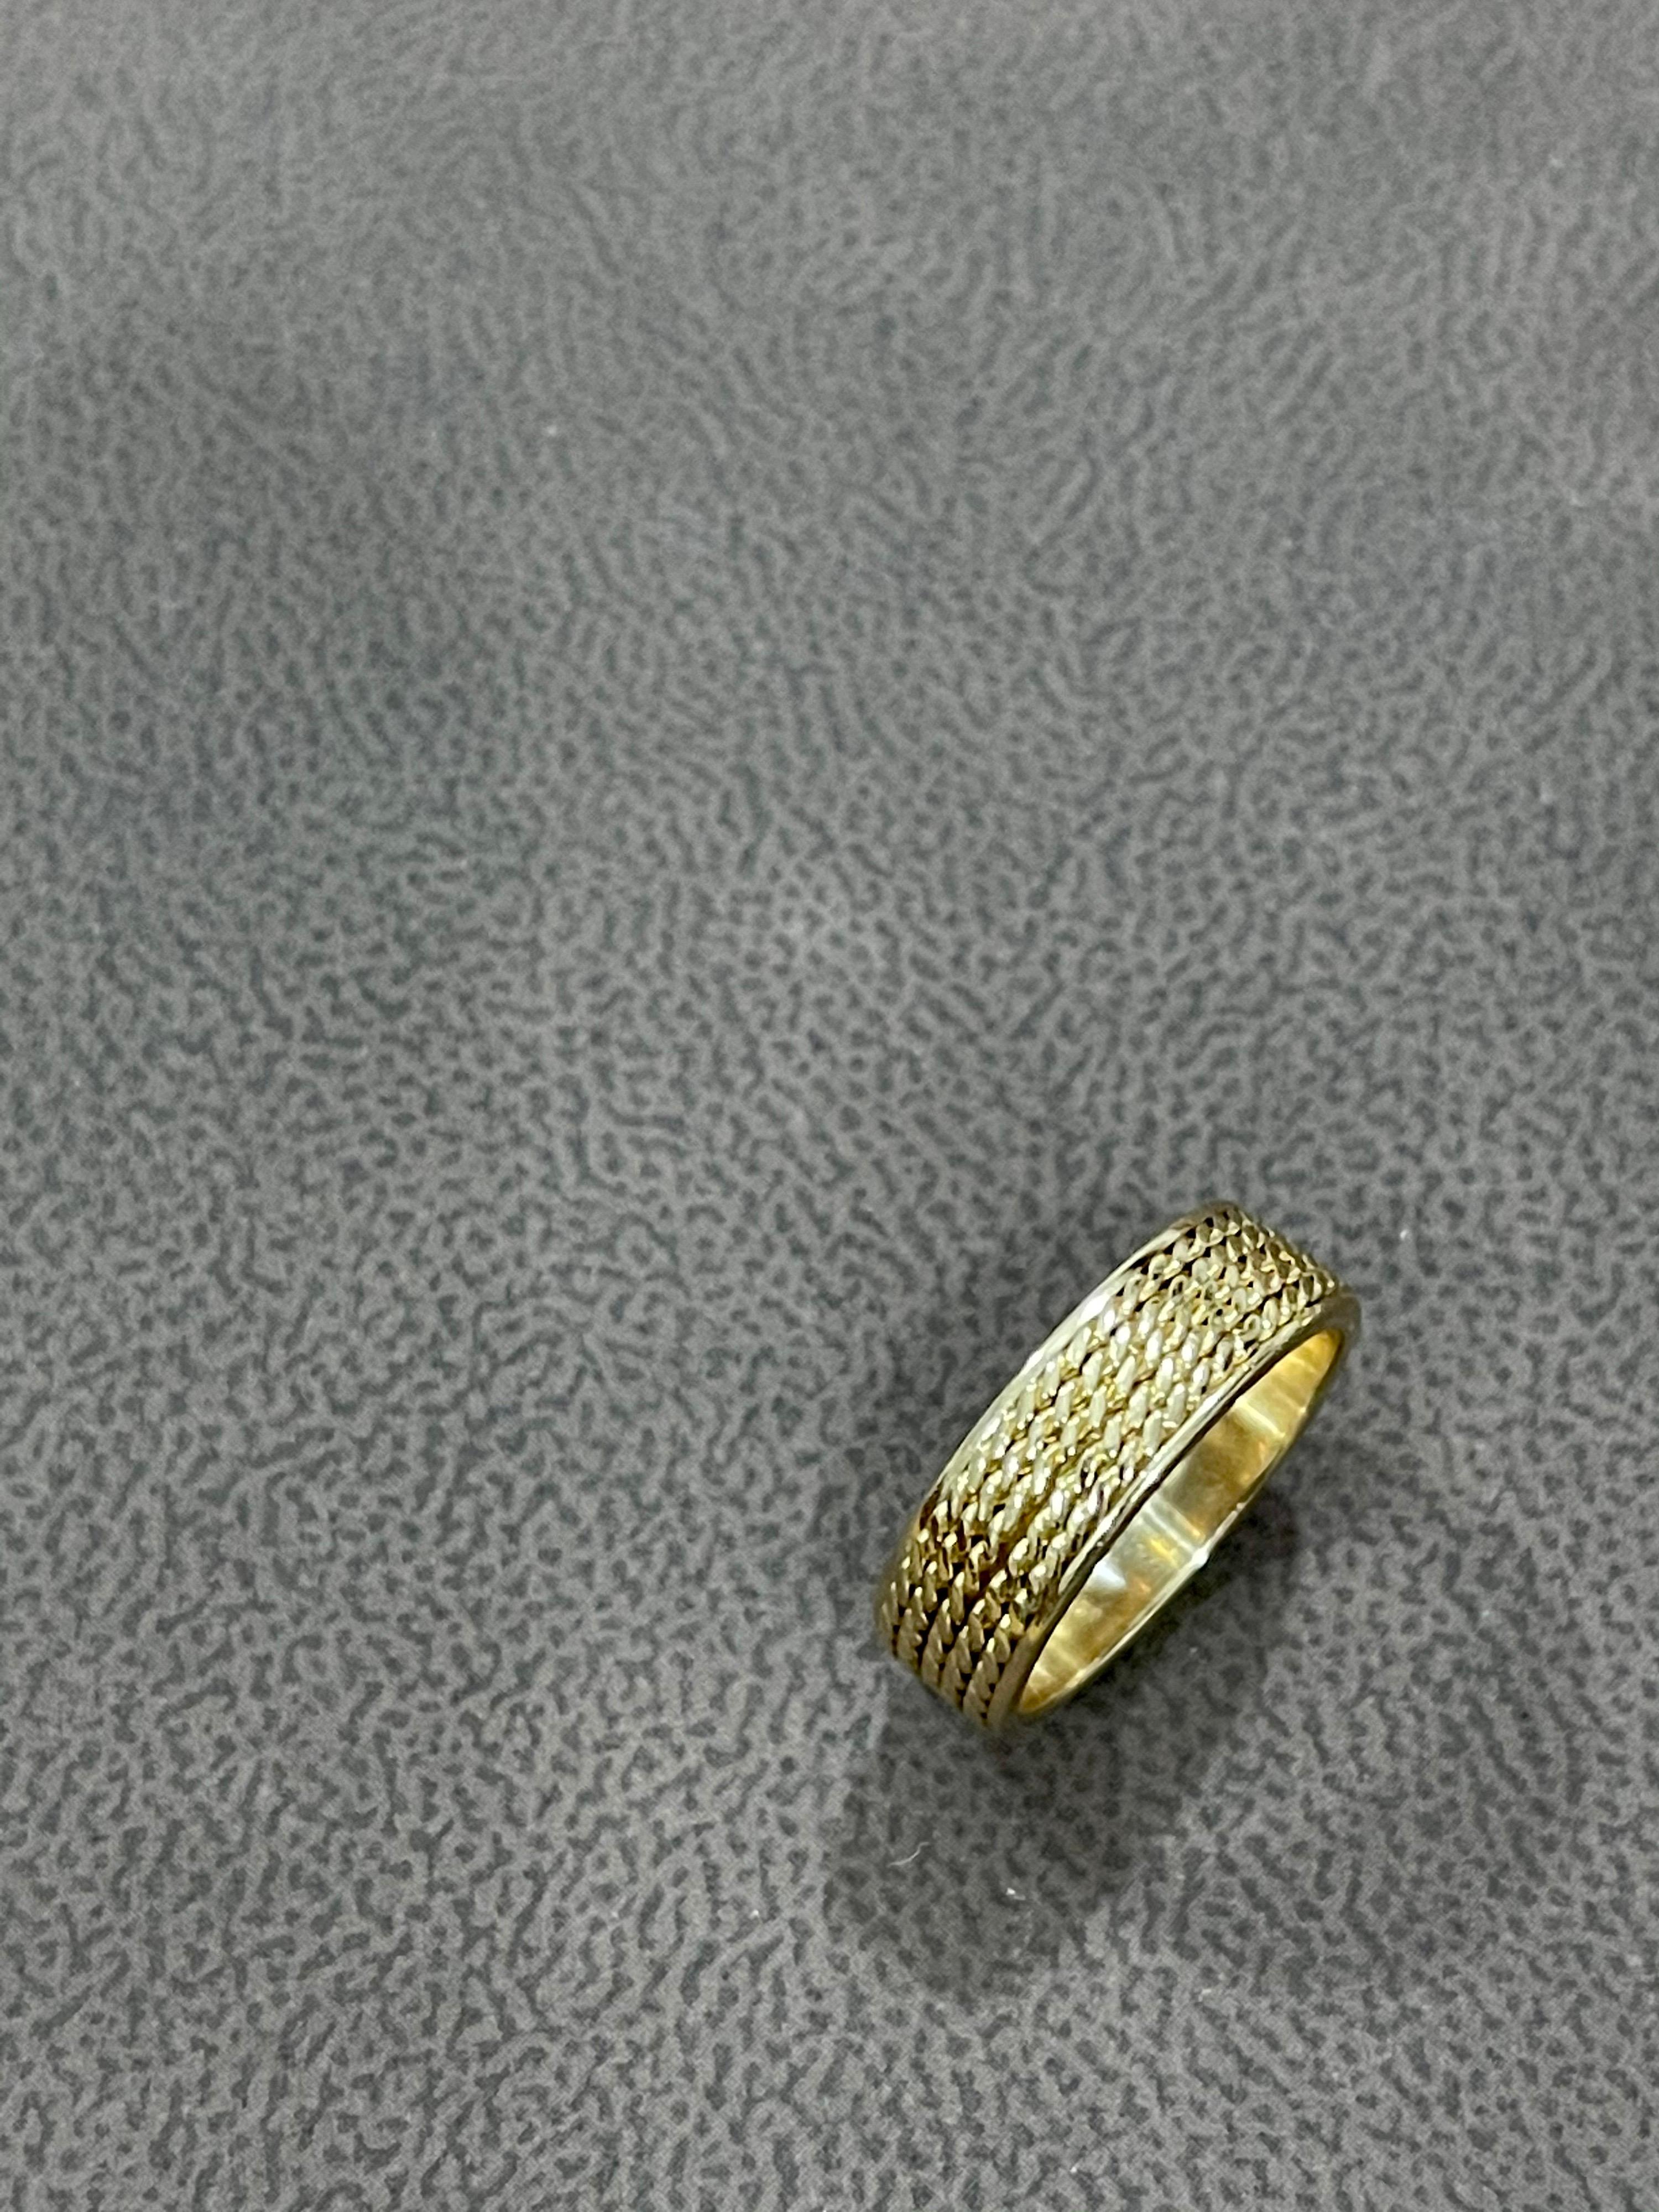 14 Karat Yellow Gold Classic Wide Wedding Band Ring, Unisex In Excellent Condition For Sale In New York, NY